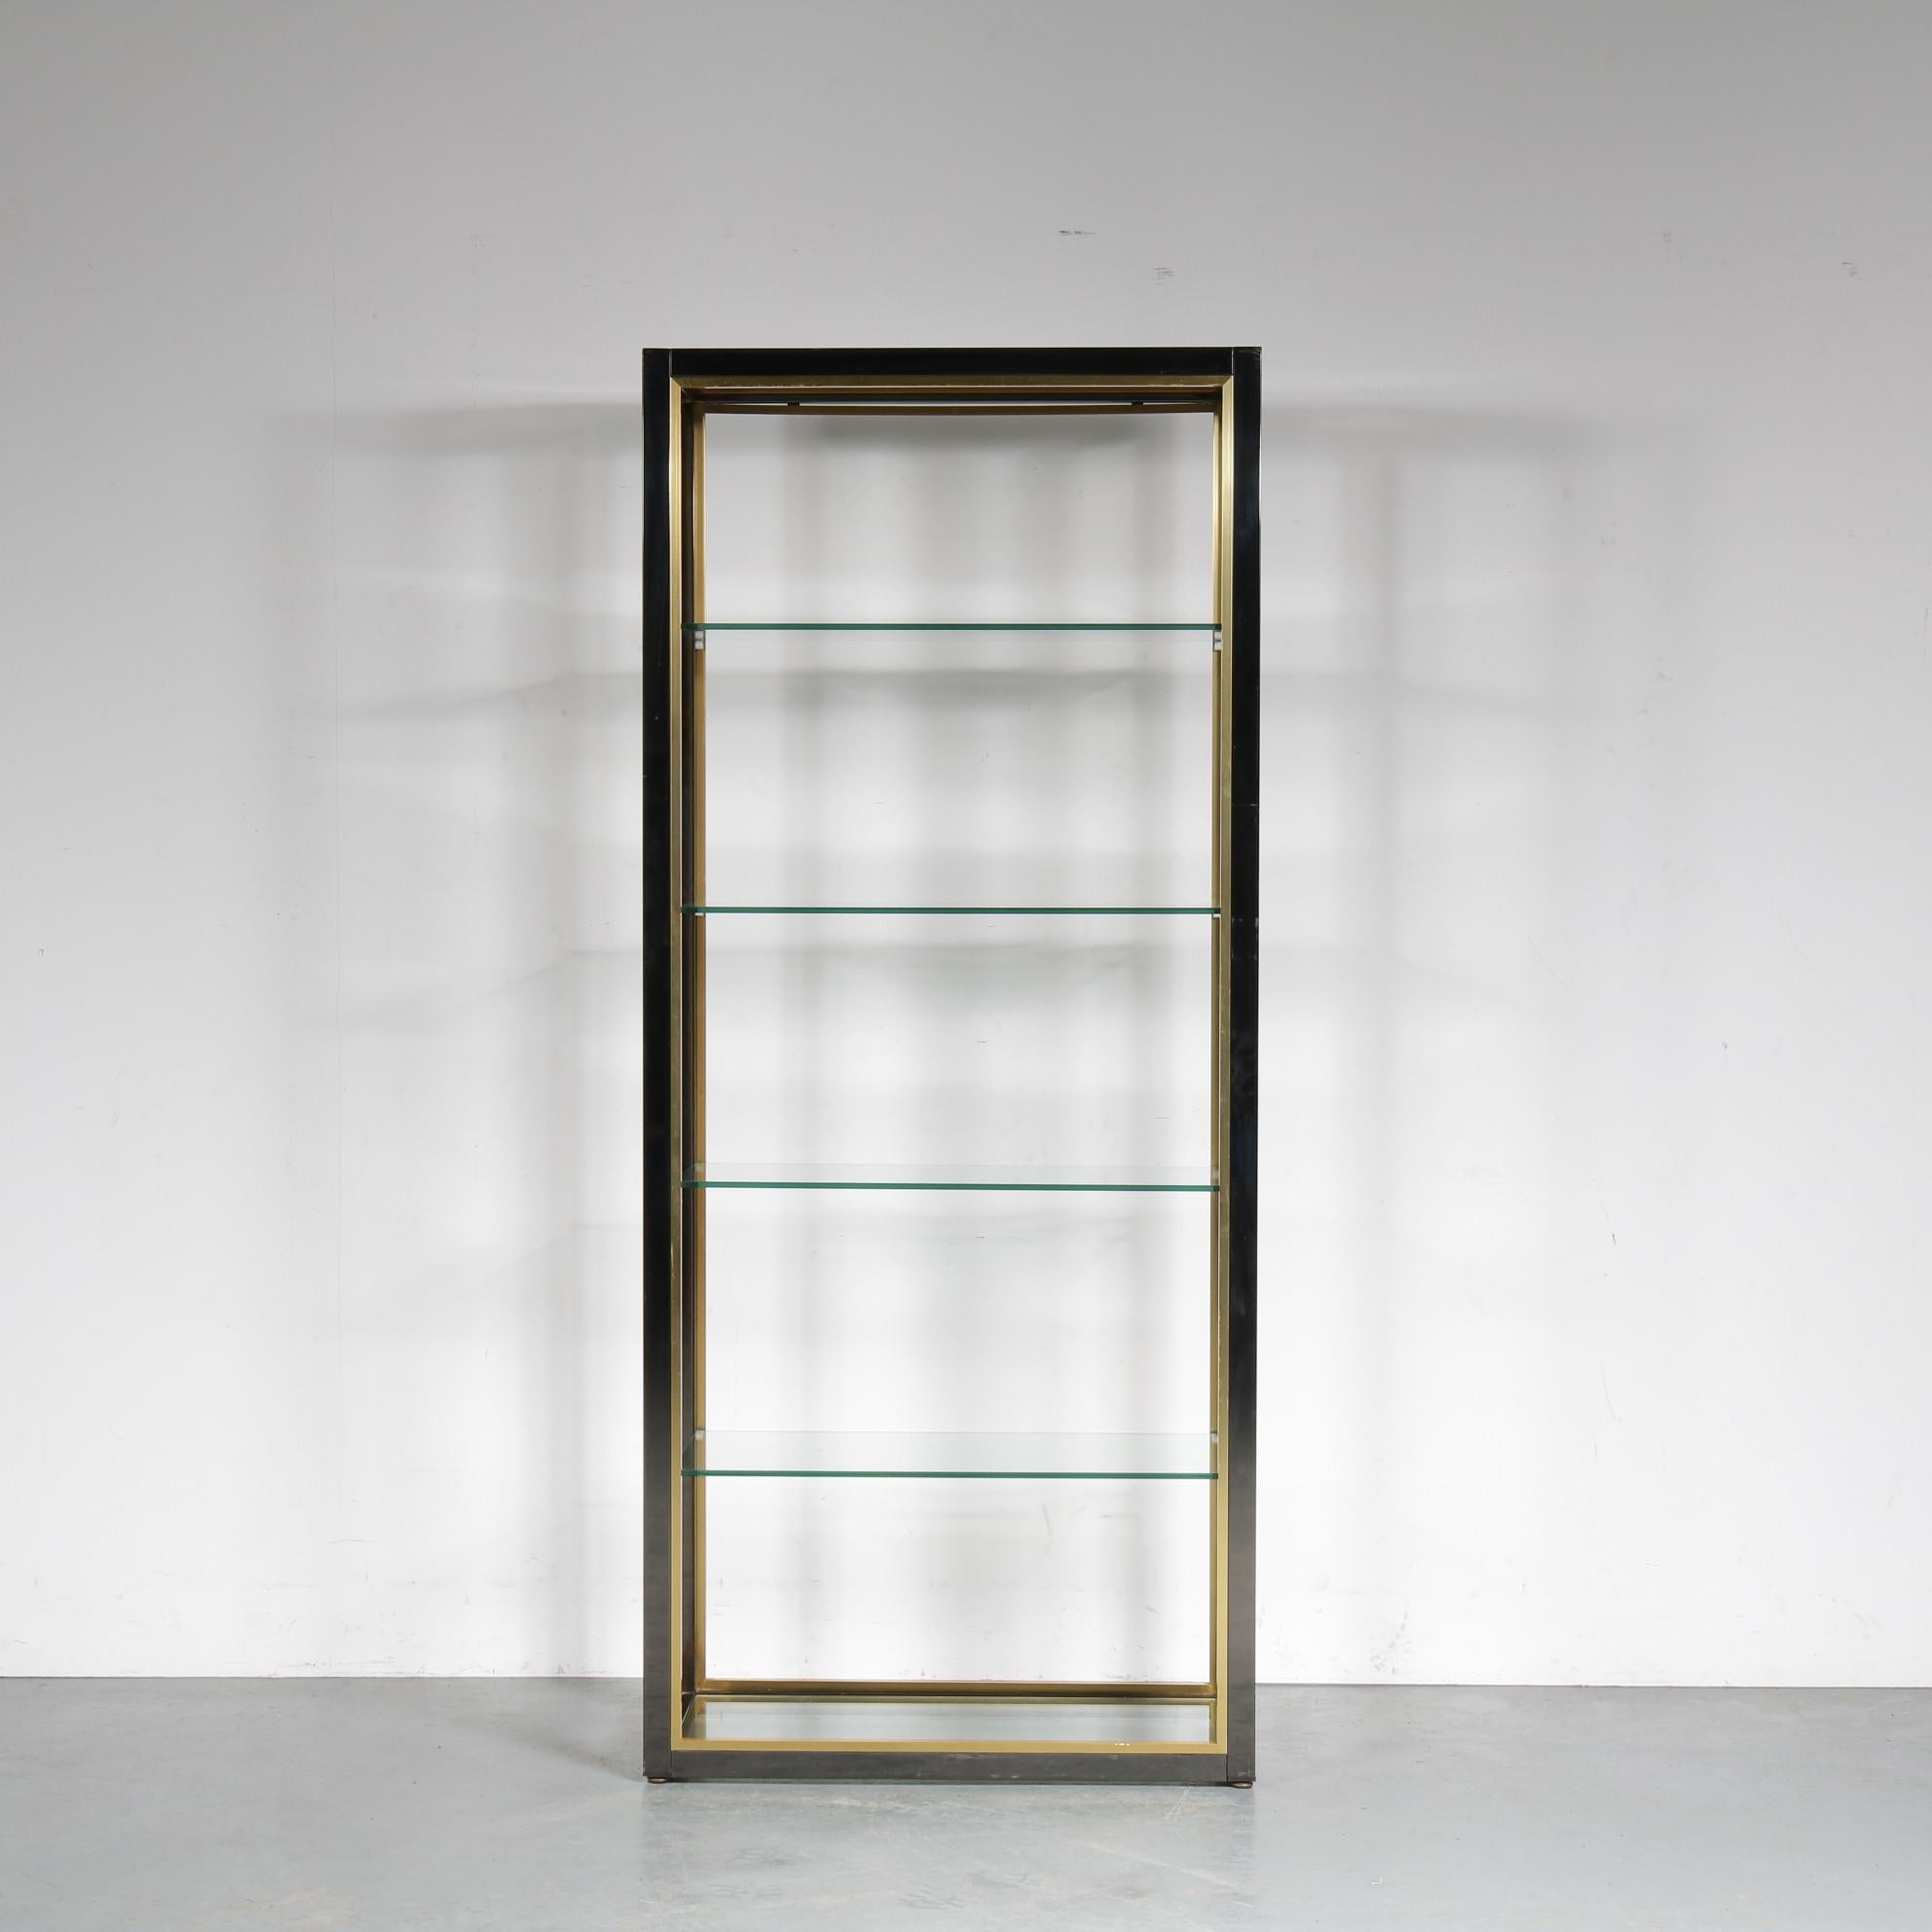 A beautiful showcase cabinet in eye-catching geometric style, manufactured by Belgo Chrom in Belgium around 1970.

It is beautifully made of high quality brass and black chrome plated metal. The rectangular shapes give it a modern style. The shelves